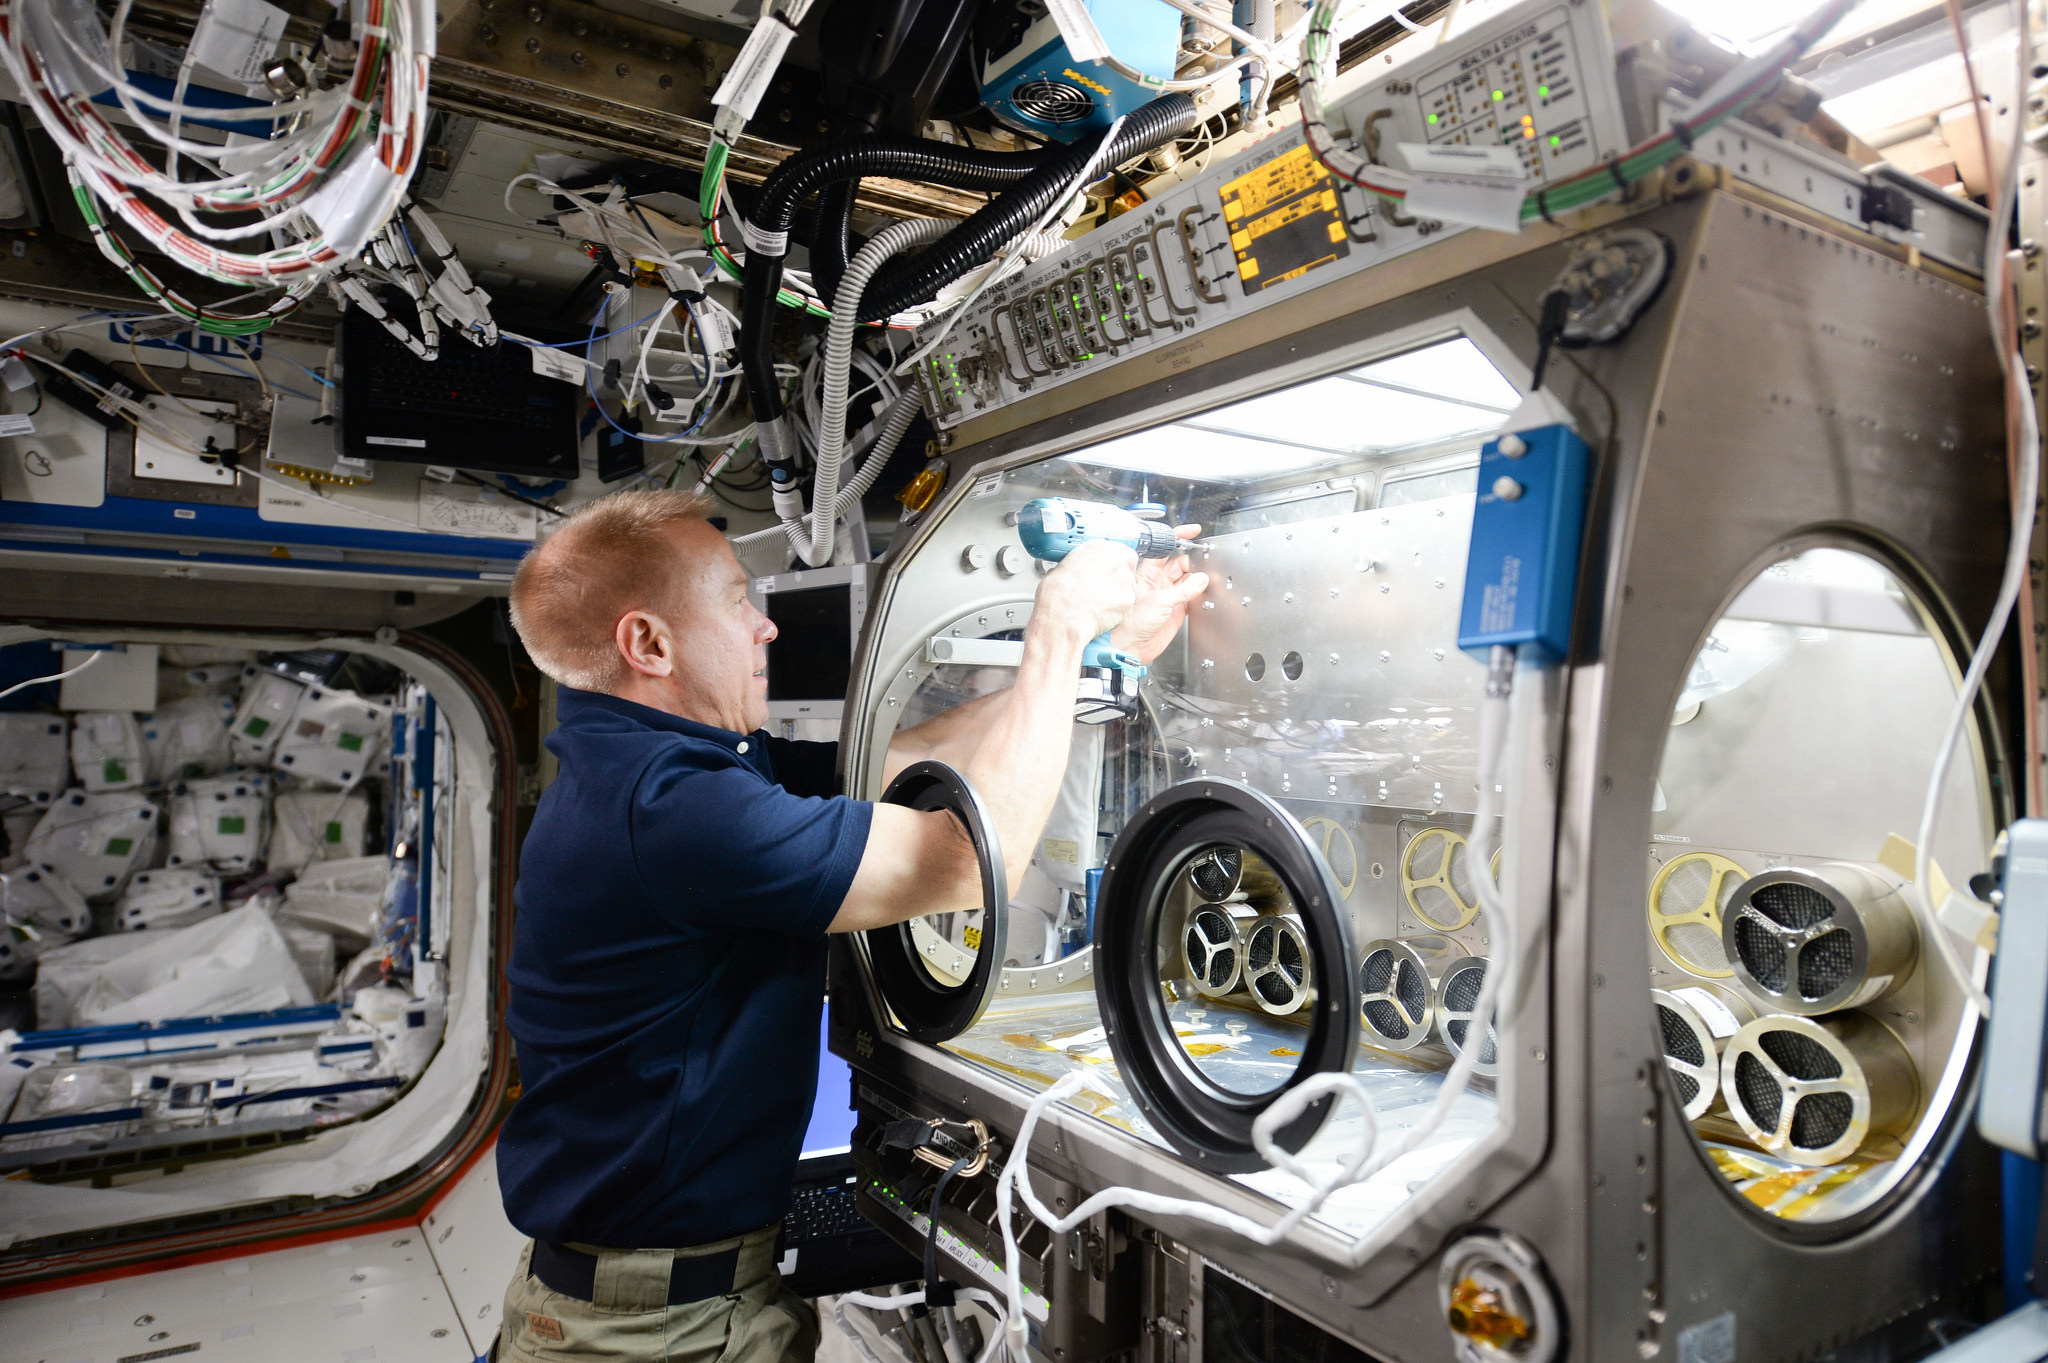 ISS crew begins work on high school-designed experiment